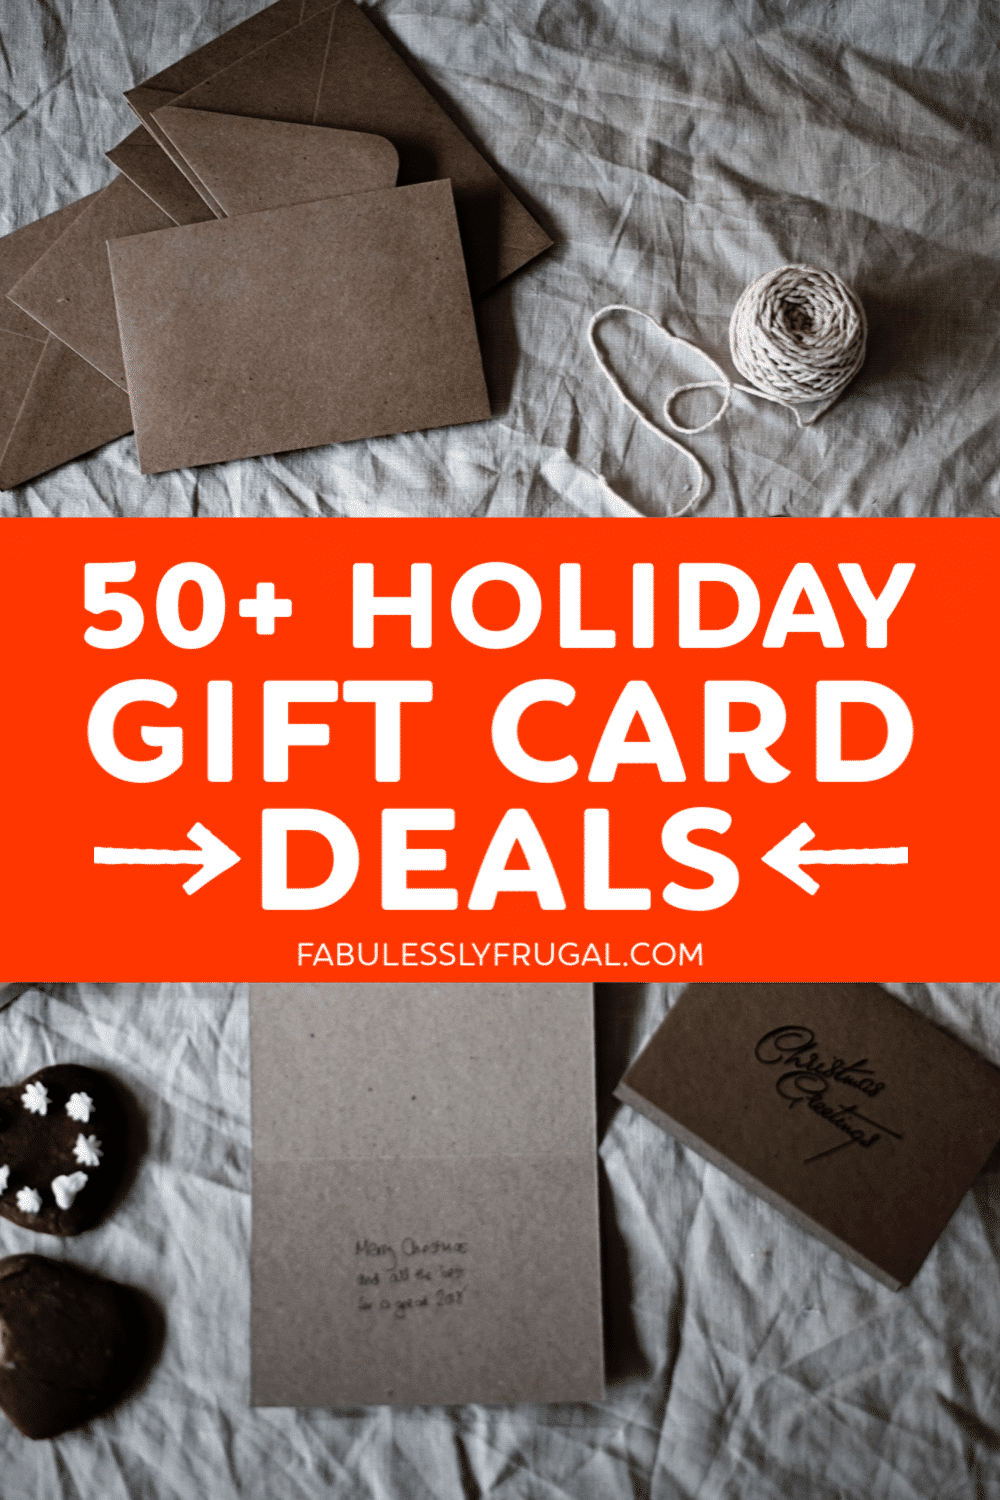 Holiday gift card deals